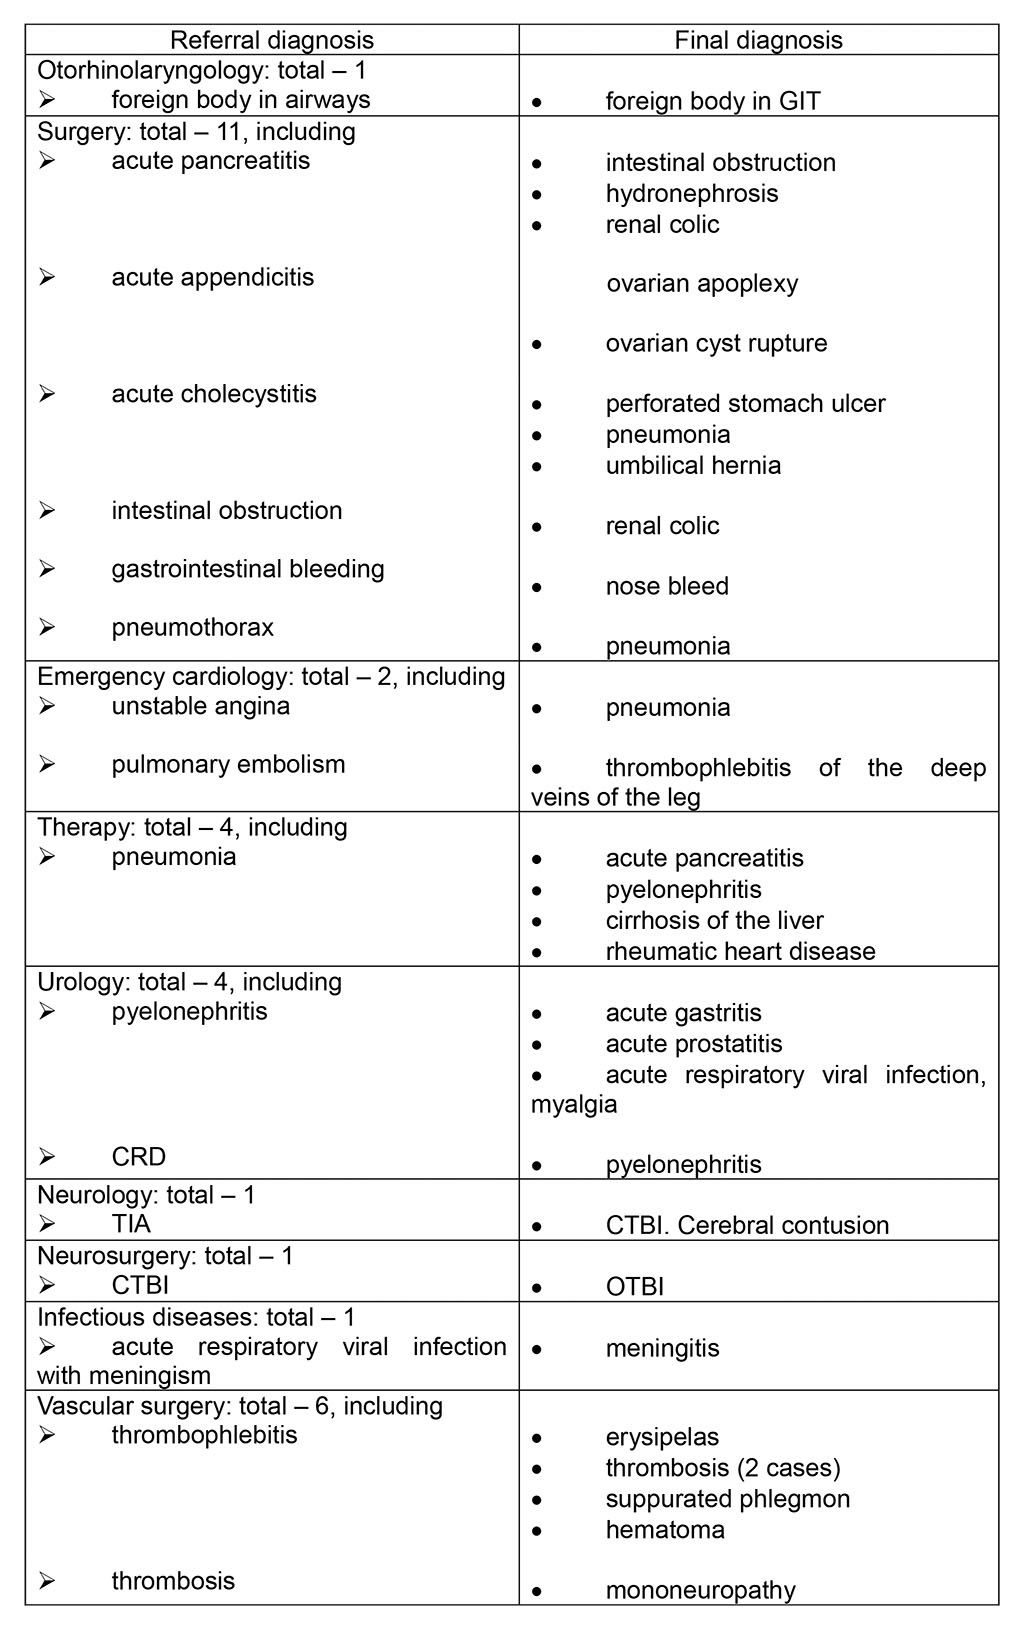 Table 2. Incorrect referral diagnosis of EMS teams for individual nosologies